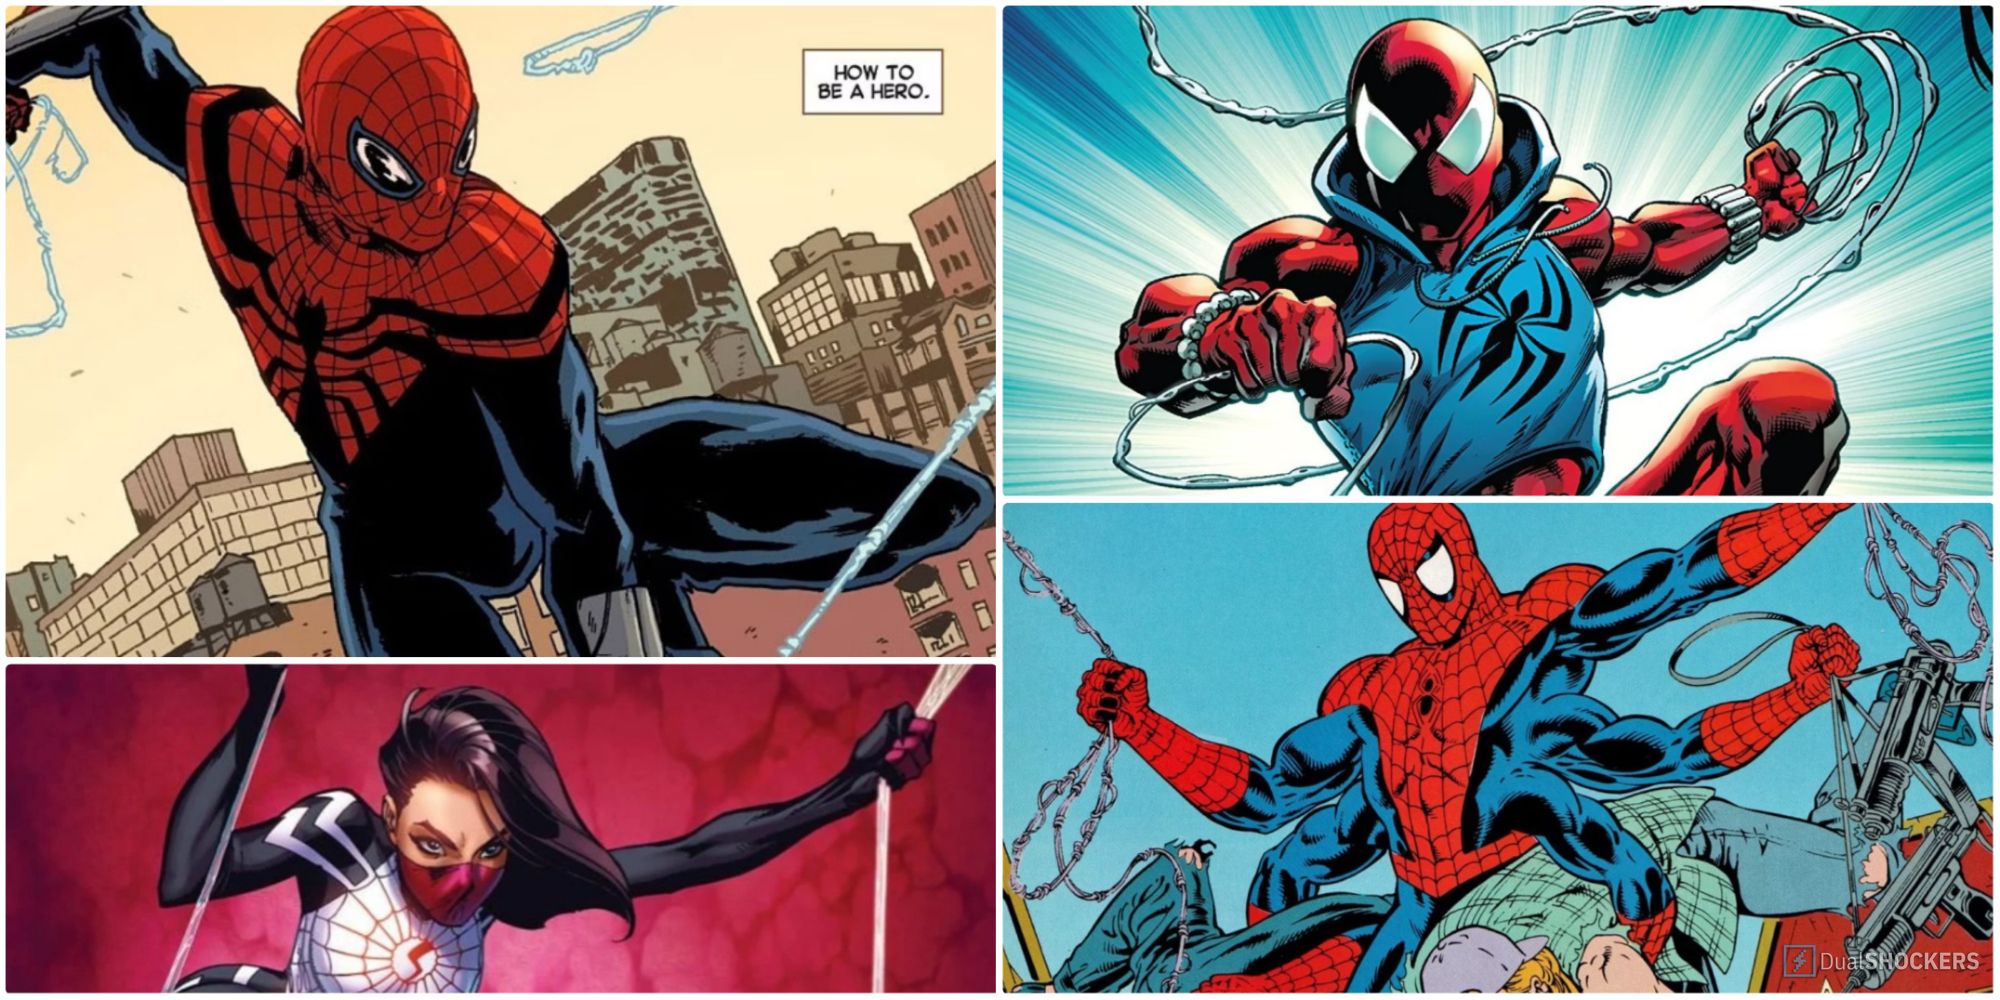 A Collage Of Spider-Men From Marvel Comics